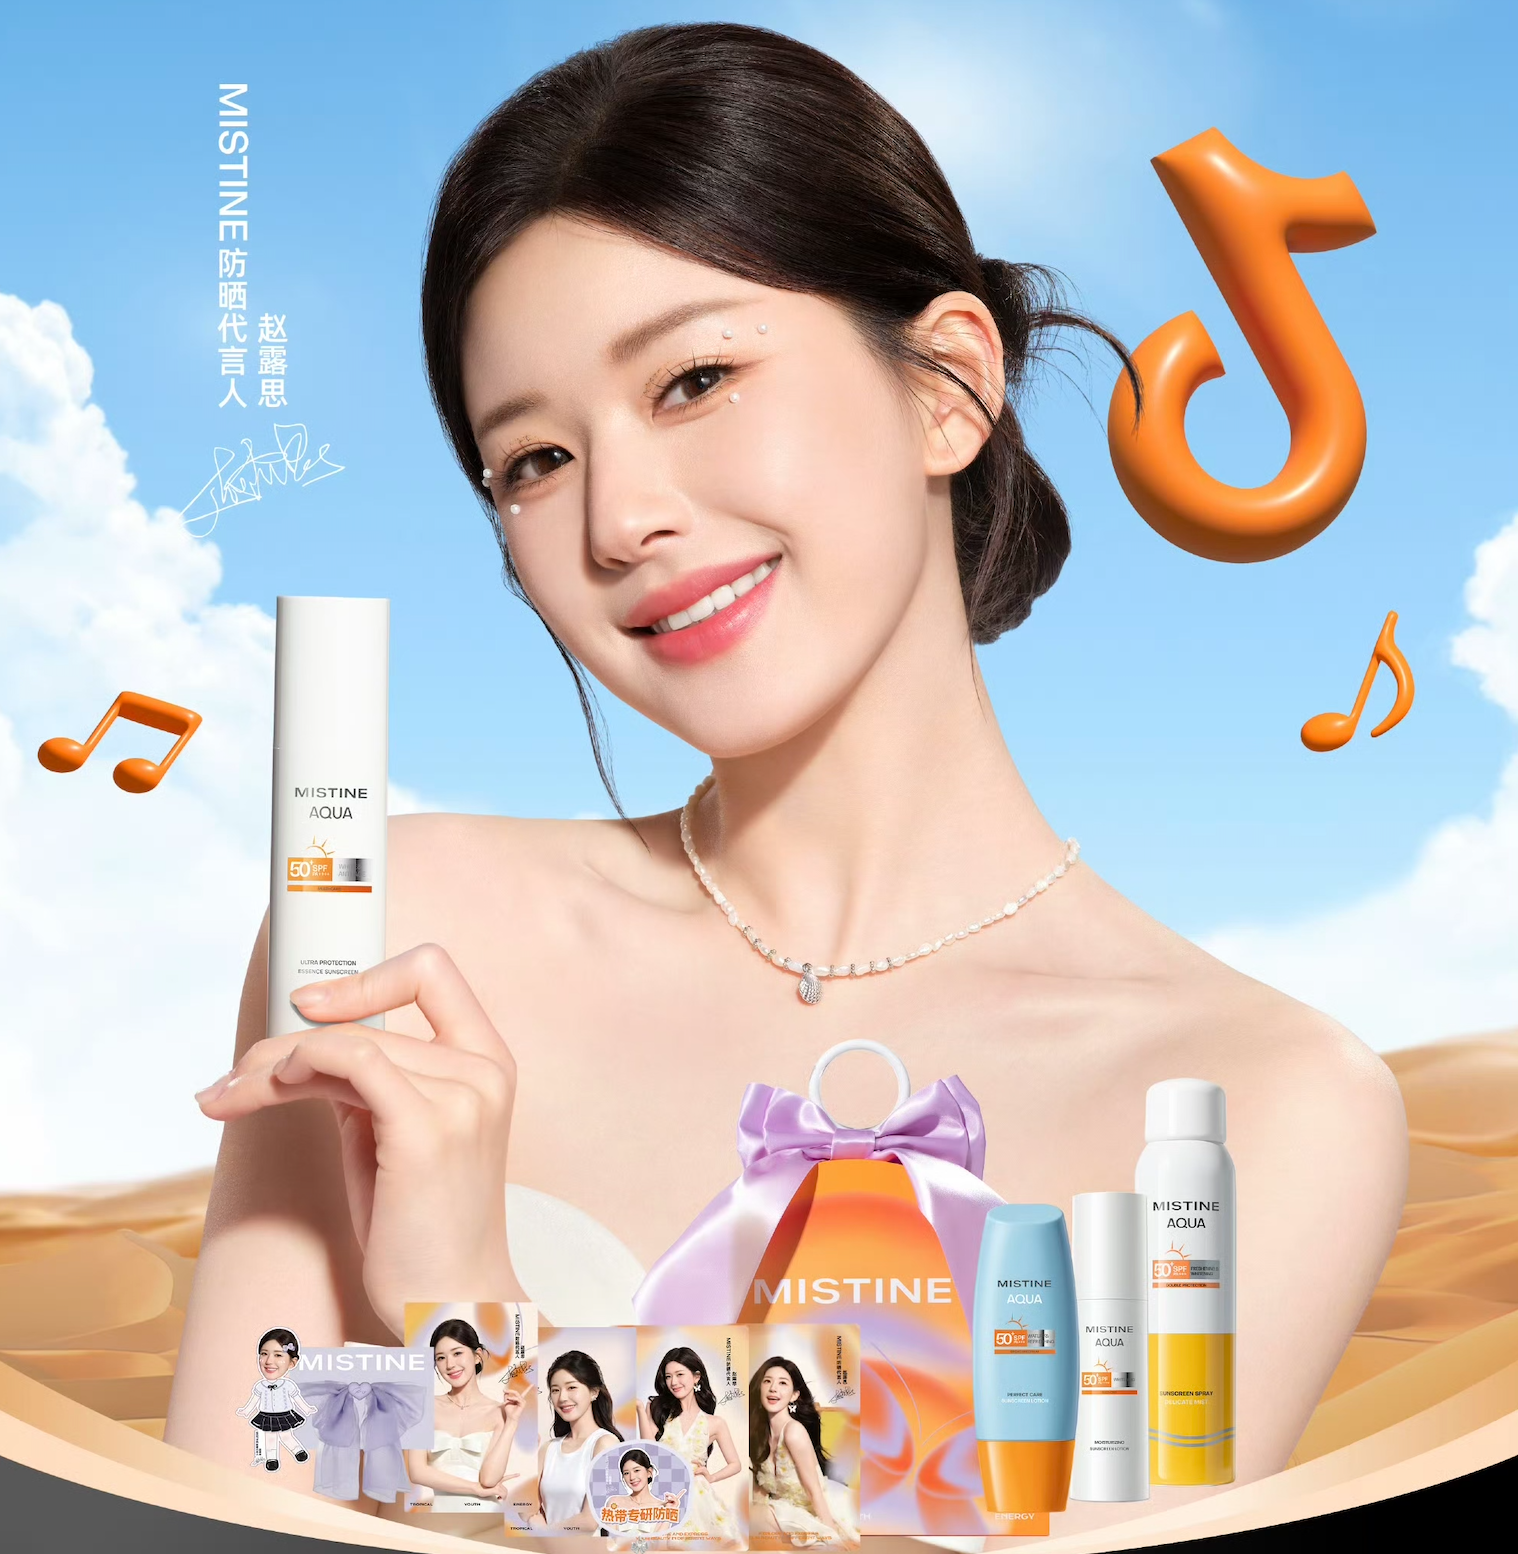 Chinese actress Zhao Lusi featured in Thai sunscreen brand Mistine's campaign. Photo: Mistine/Weibo